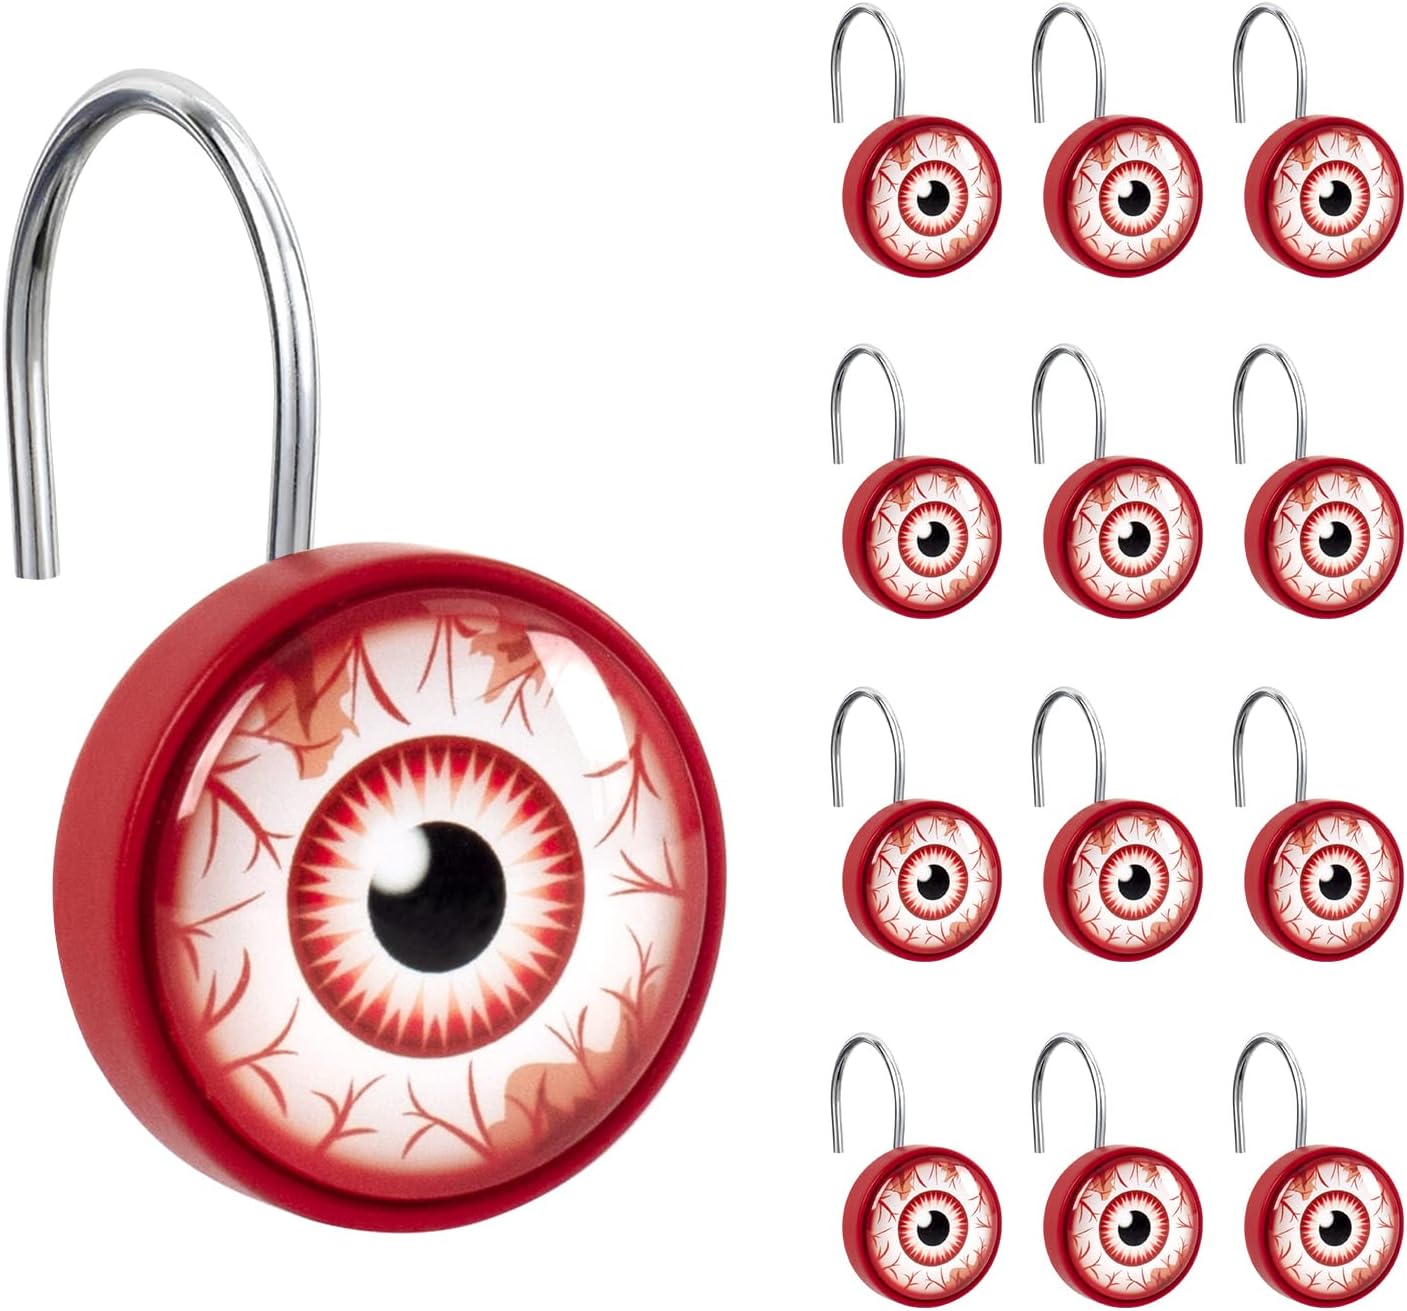 Sunlit Halloween Scary Eye with Bloodshot Round Crystal Glass Decorative Shower Curtain Hooks, Rust Proof Oil Rubbed Metal Shower Curtain Rings-12 Pack